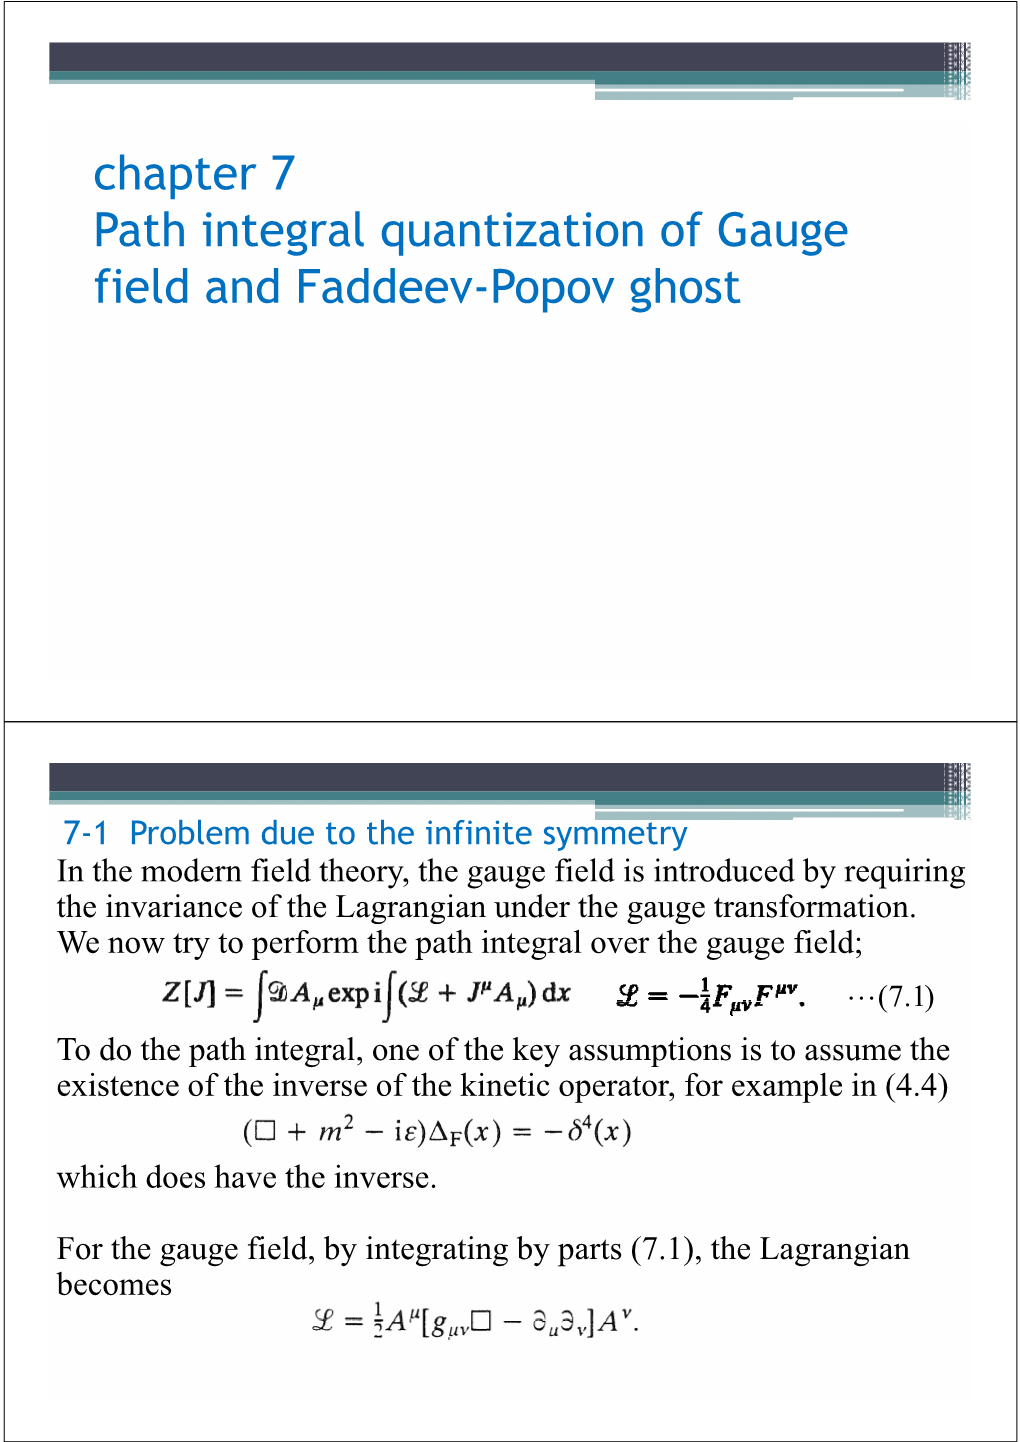 Chapter 7 Path Integral Quantization of Gauge Field and Faddeev Popov Ghost Field and Faddeev-Popov Ghost